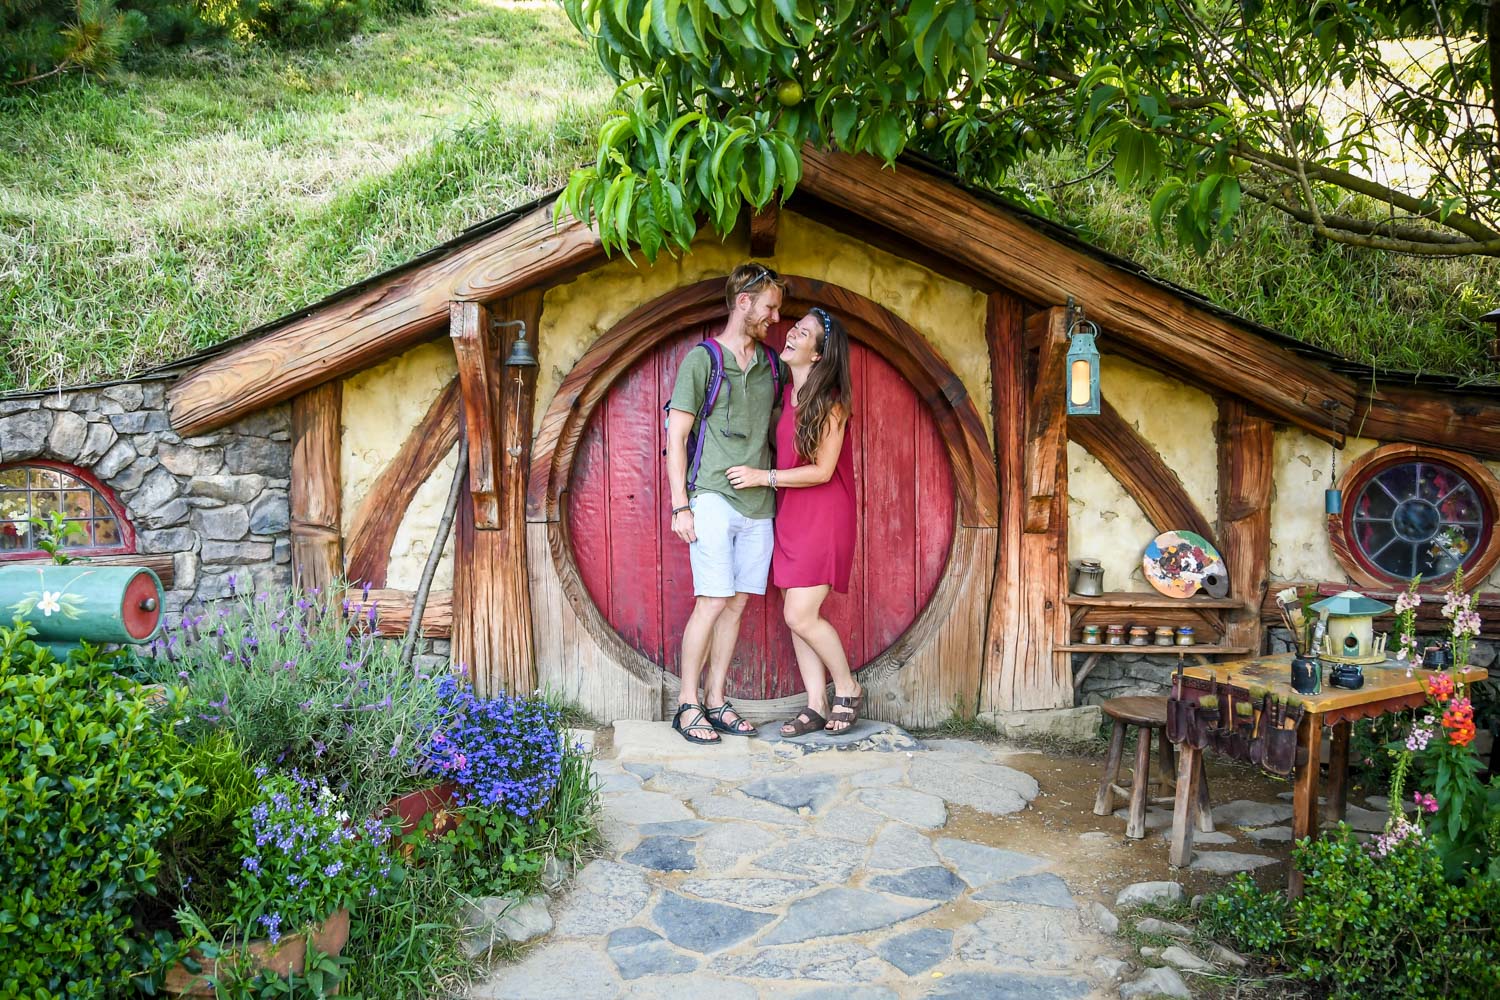 Top Things to Do in New Zealand Visit Hobbiton